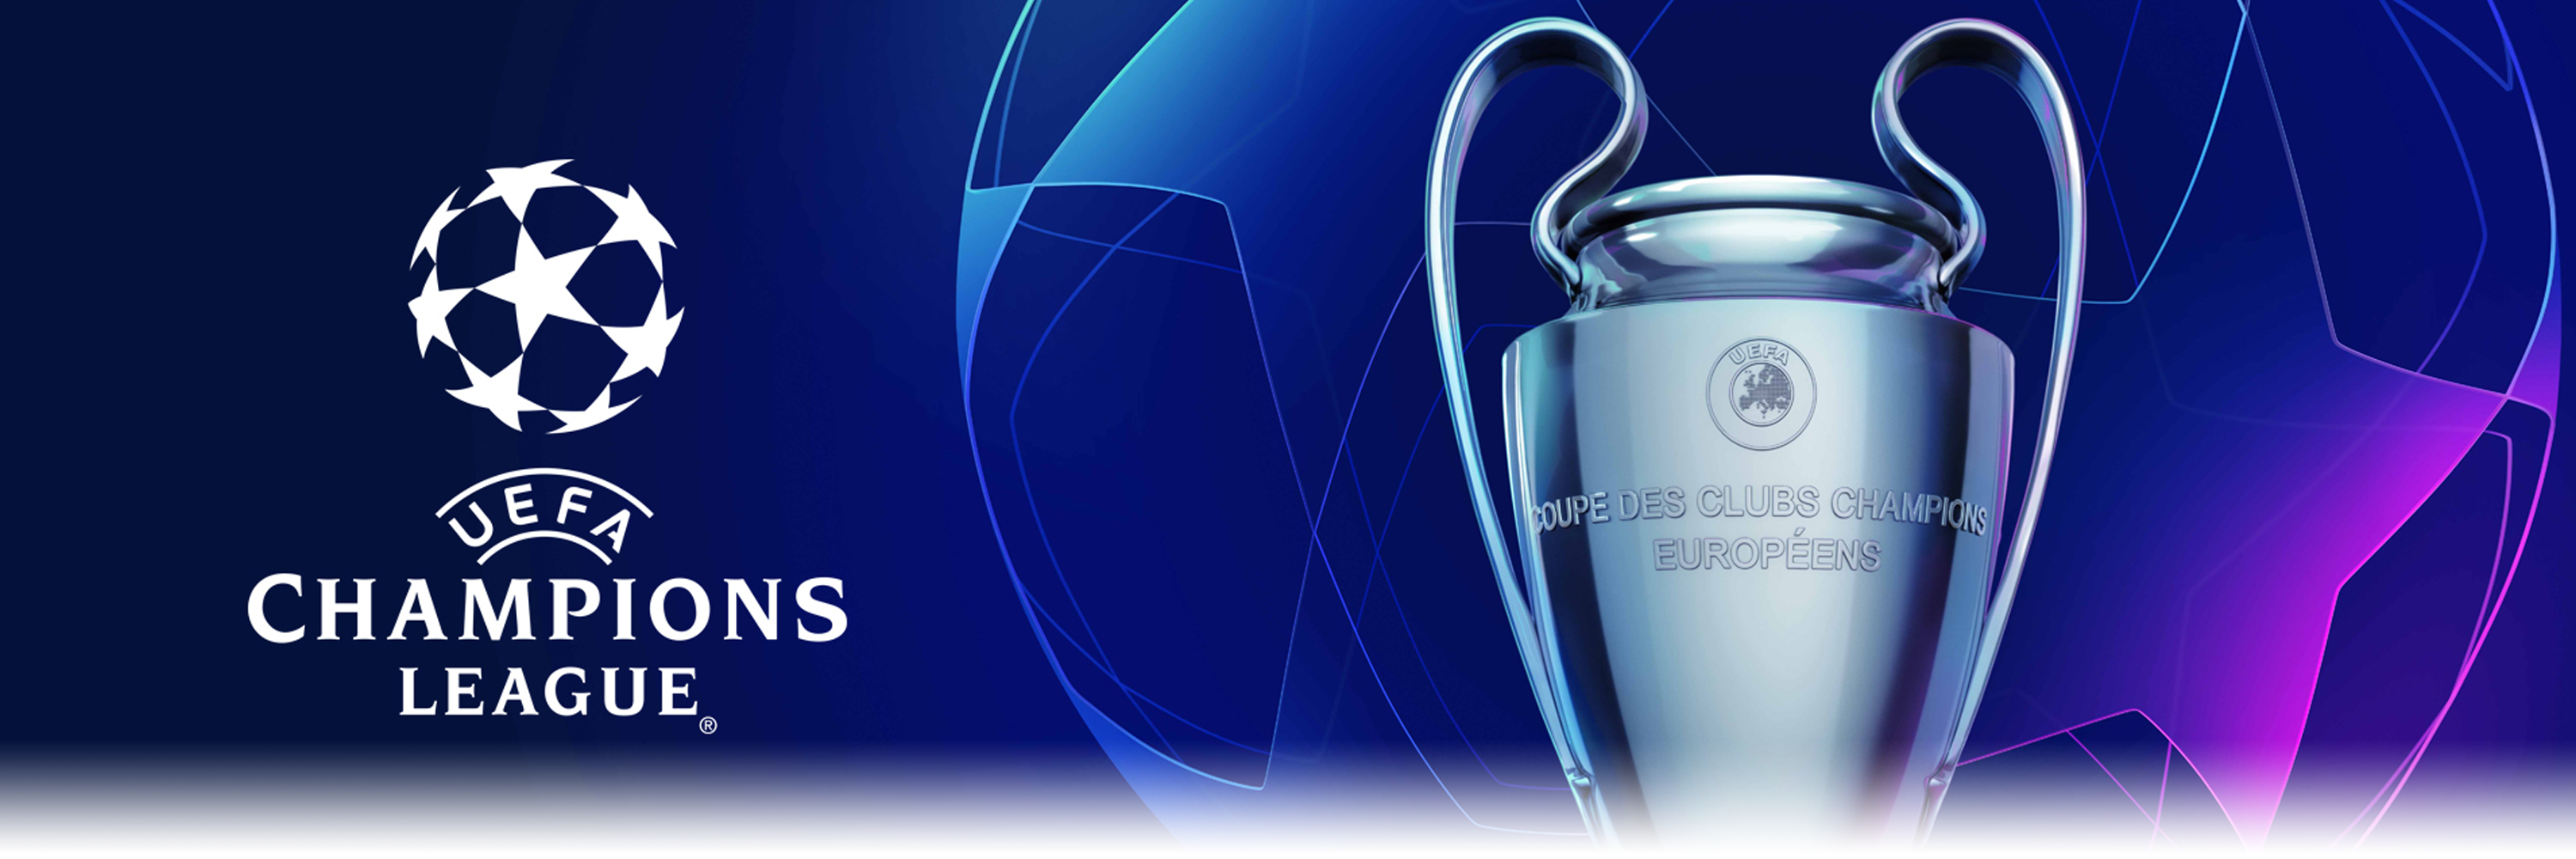 Champions' League match to be streamed live